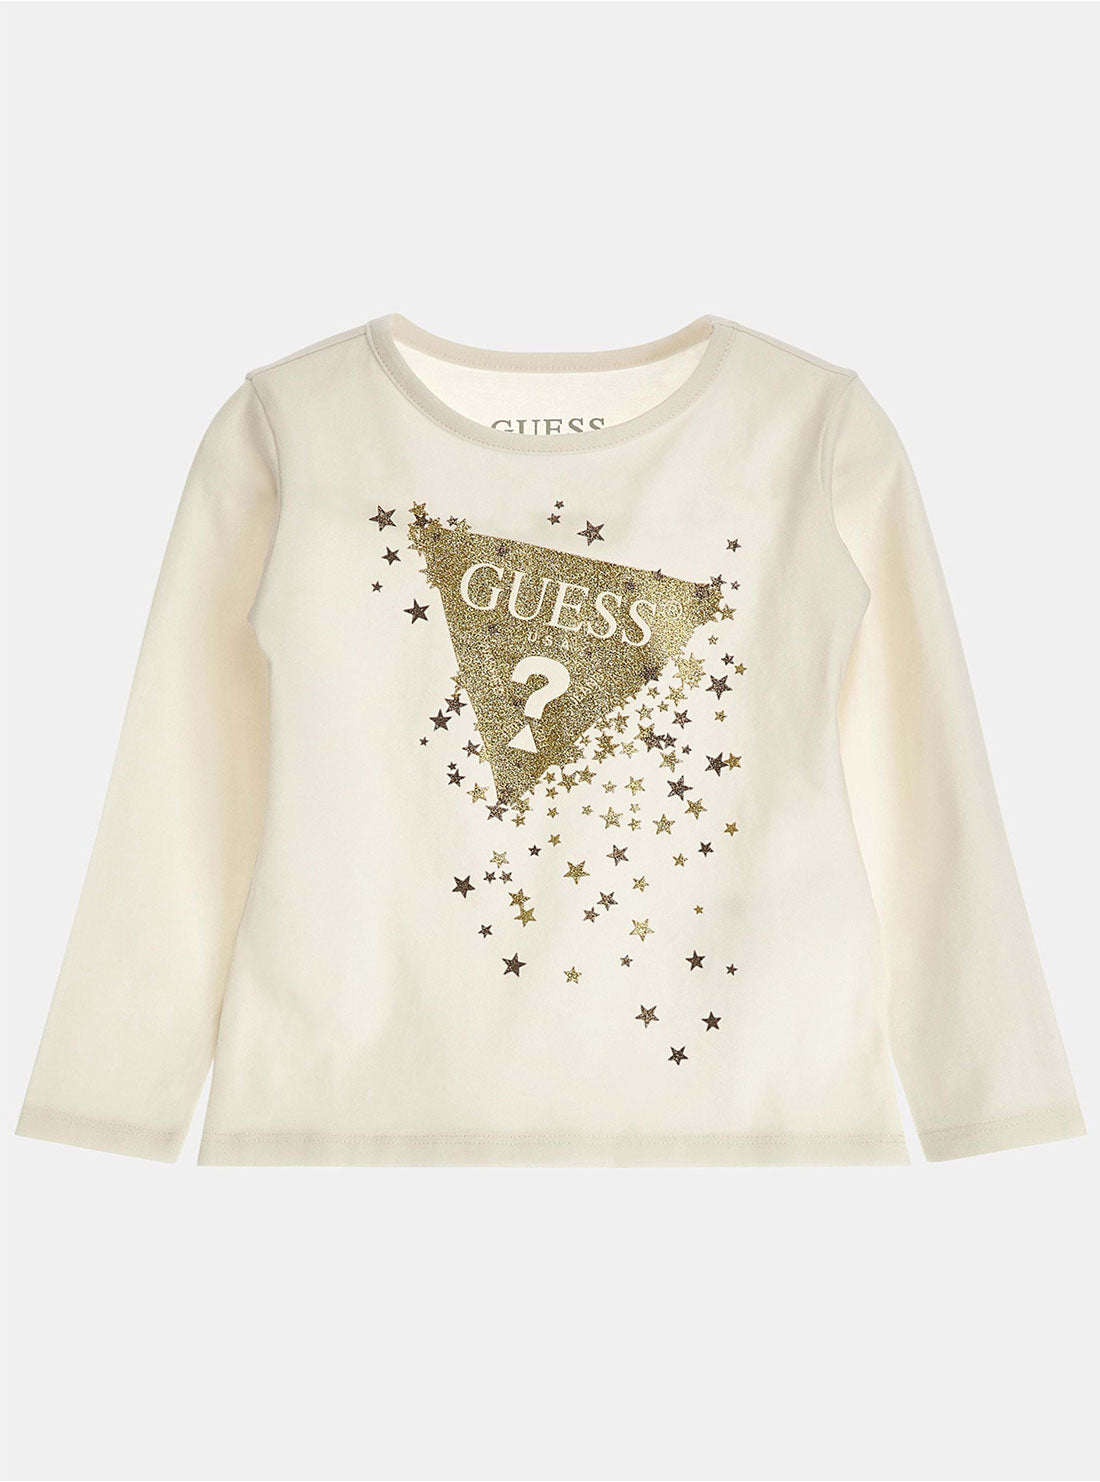 GUESS Cream Long Sleeve T-Shirt (2-7) front view